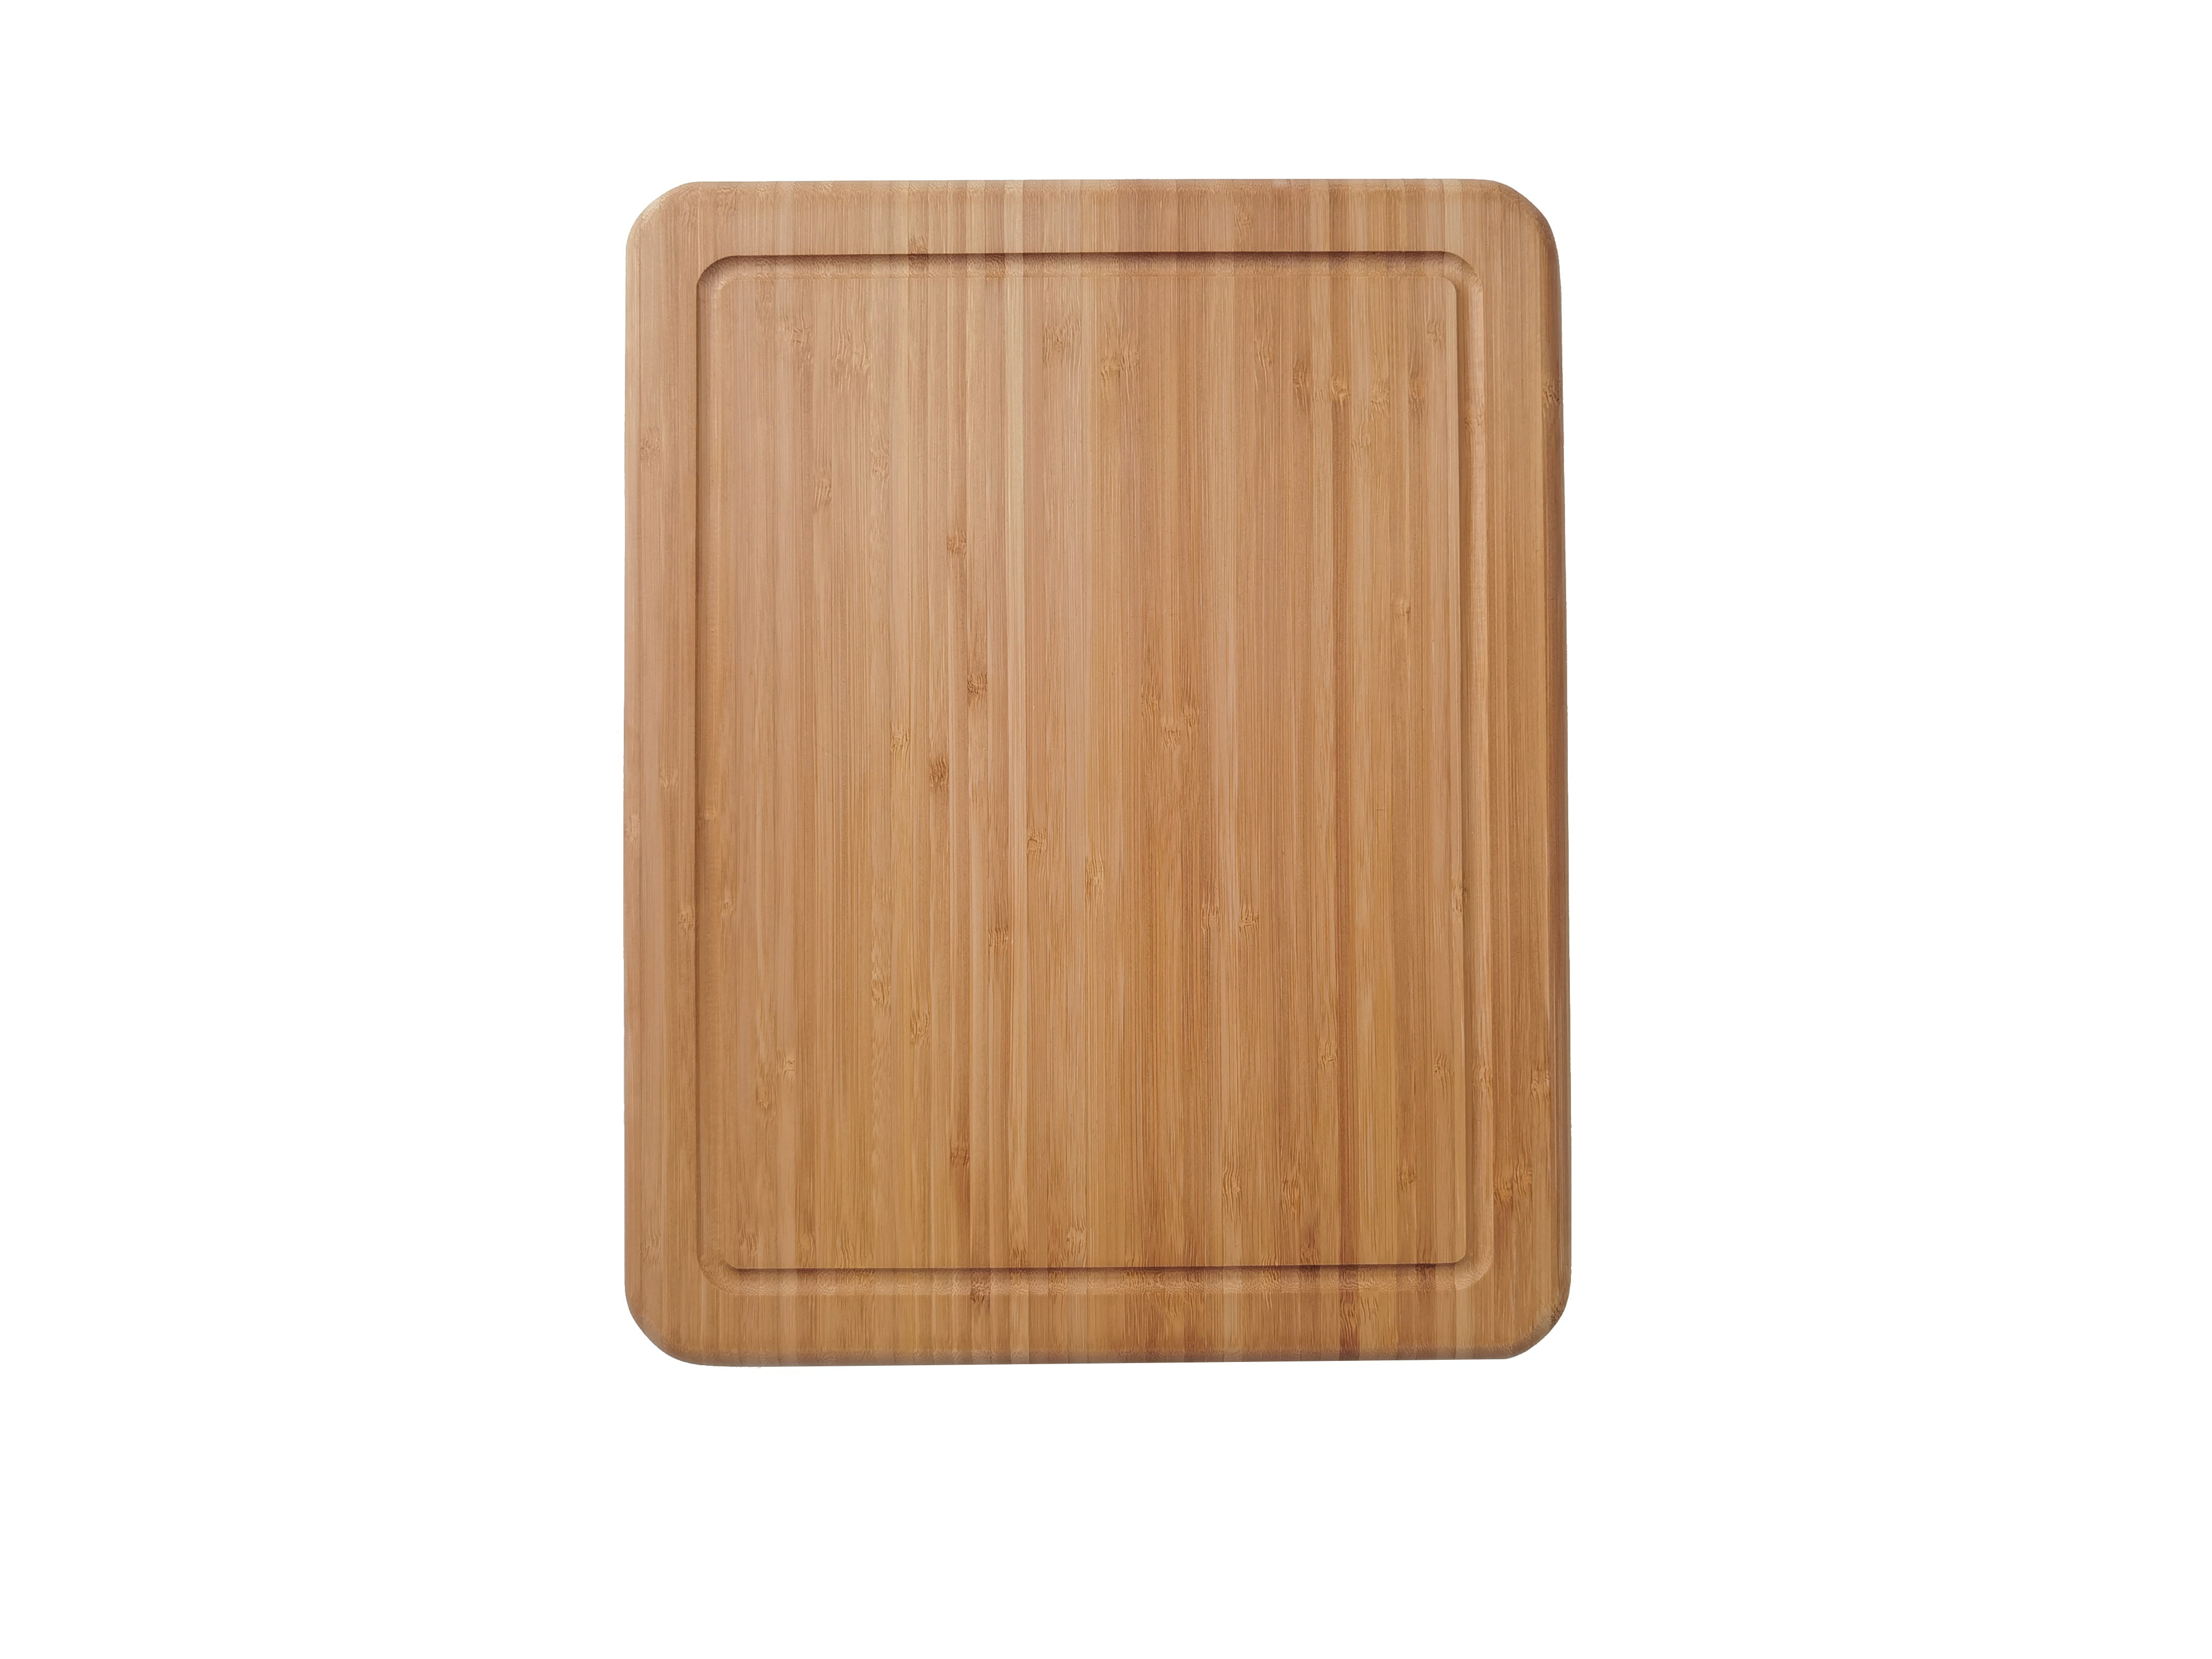 Professional-Grade 100% Organic bamboo Please that gourmet in your life with the best cutting board. Oliva Italiana Bamboo Texas State Cutting Board Eco-Friendly and wont dull your blade 